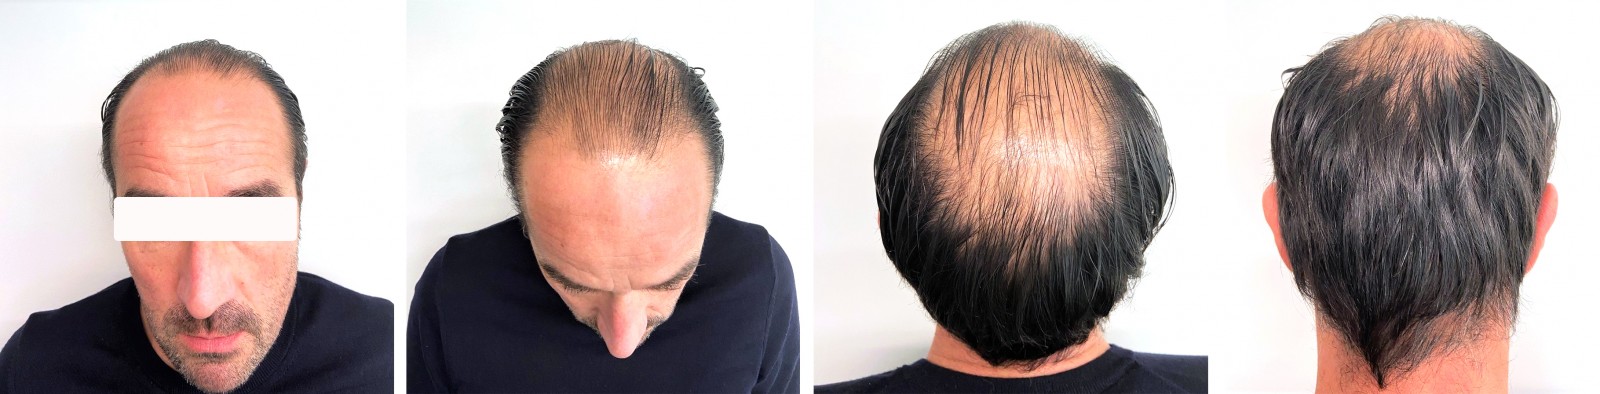 Hair surgery hair transplant before and after surgery in antwerp